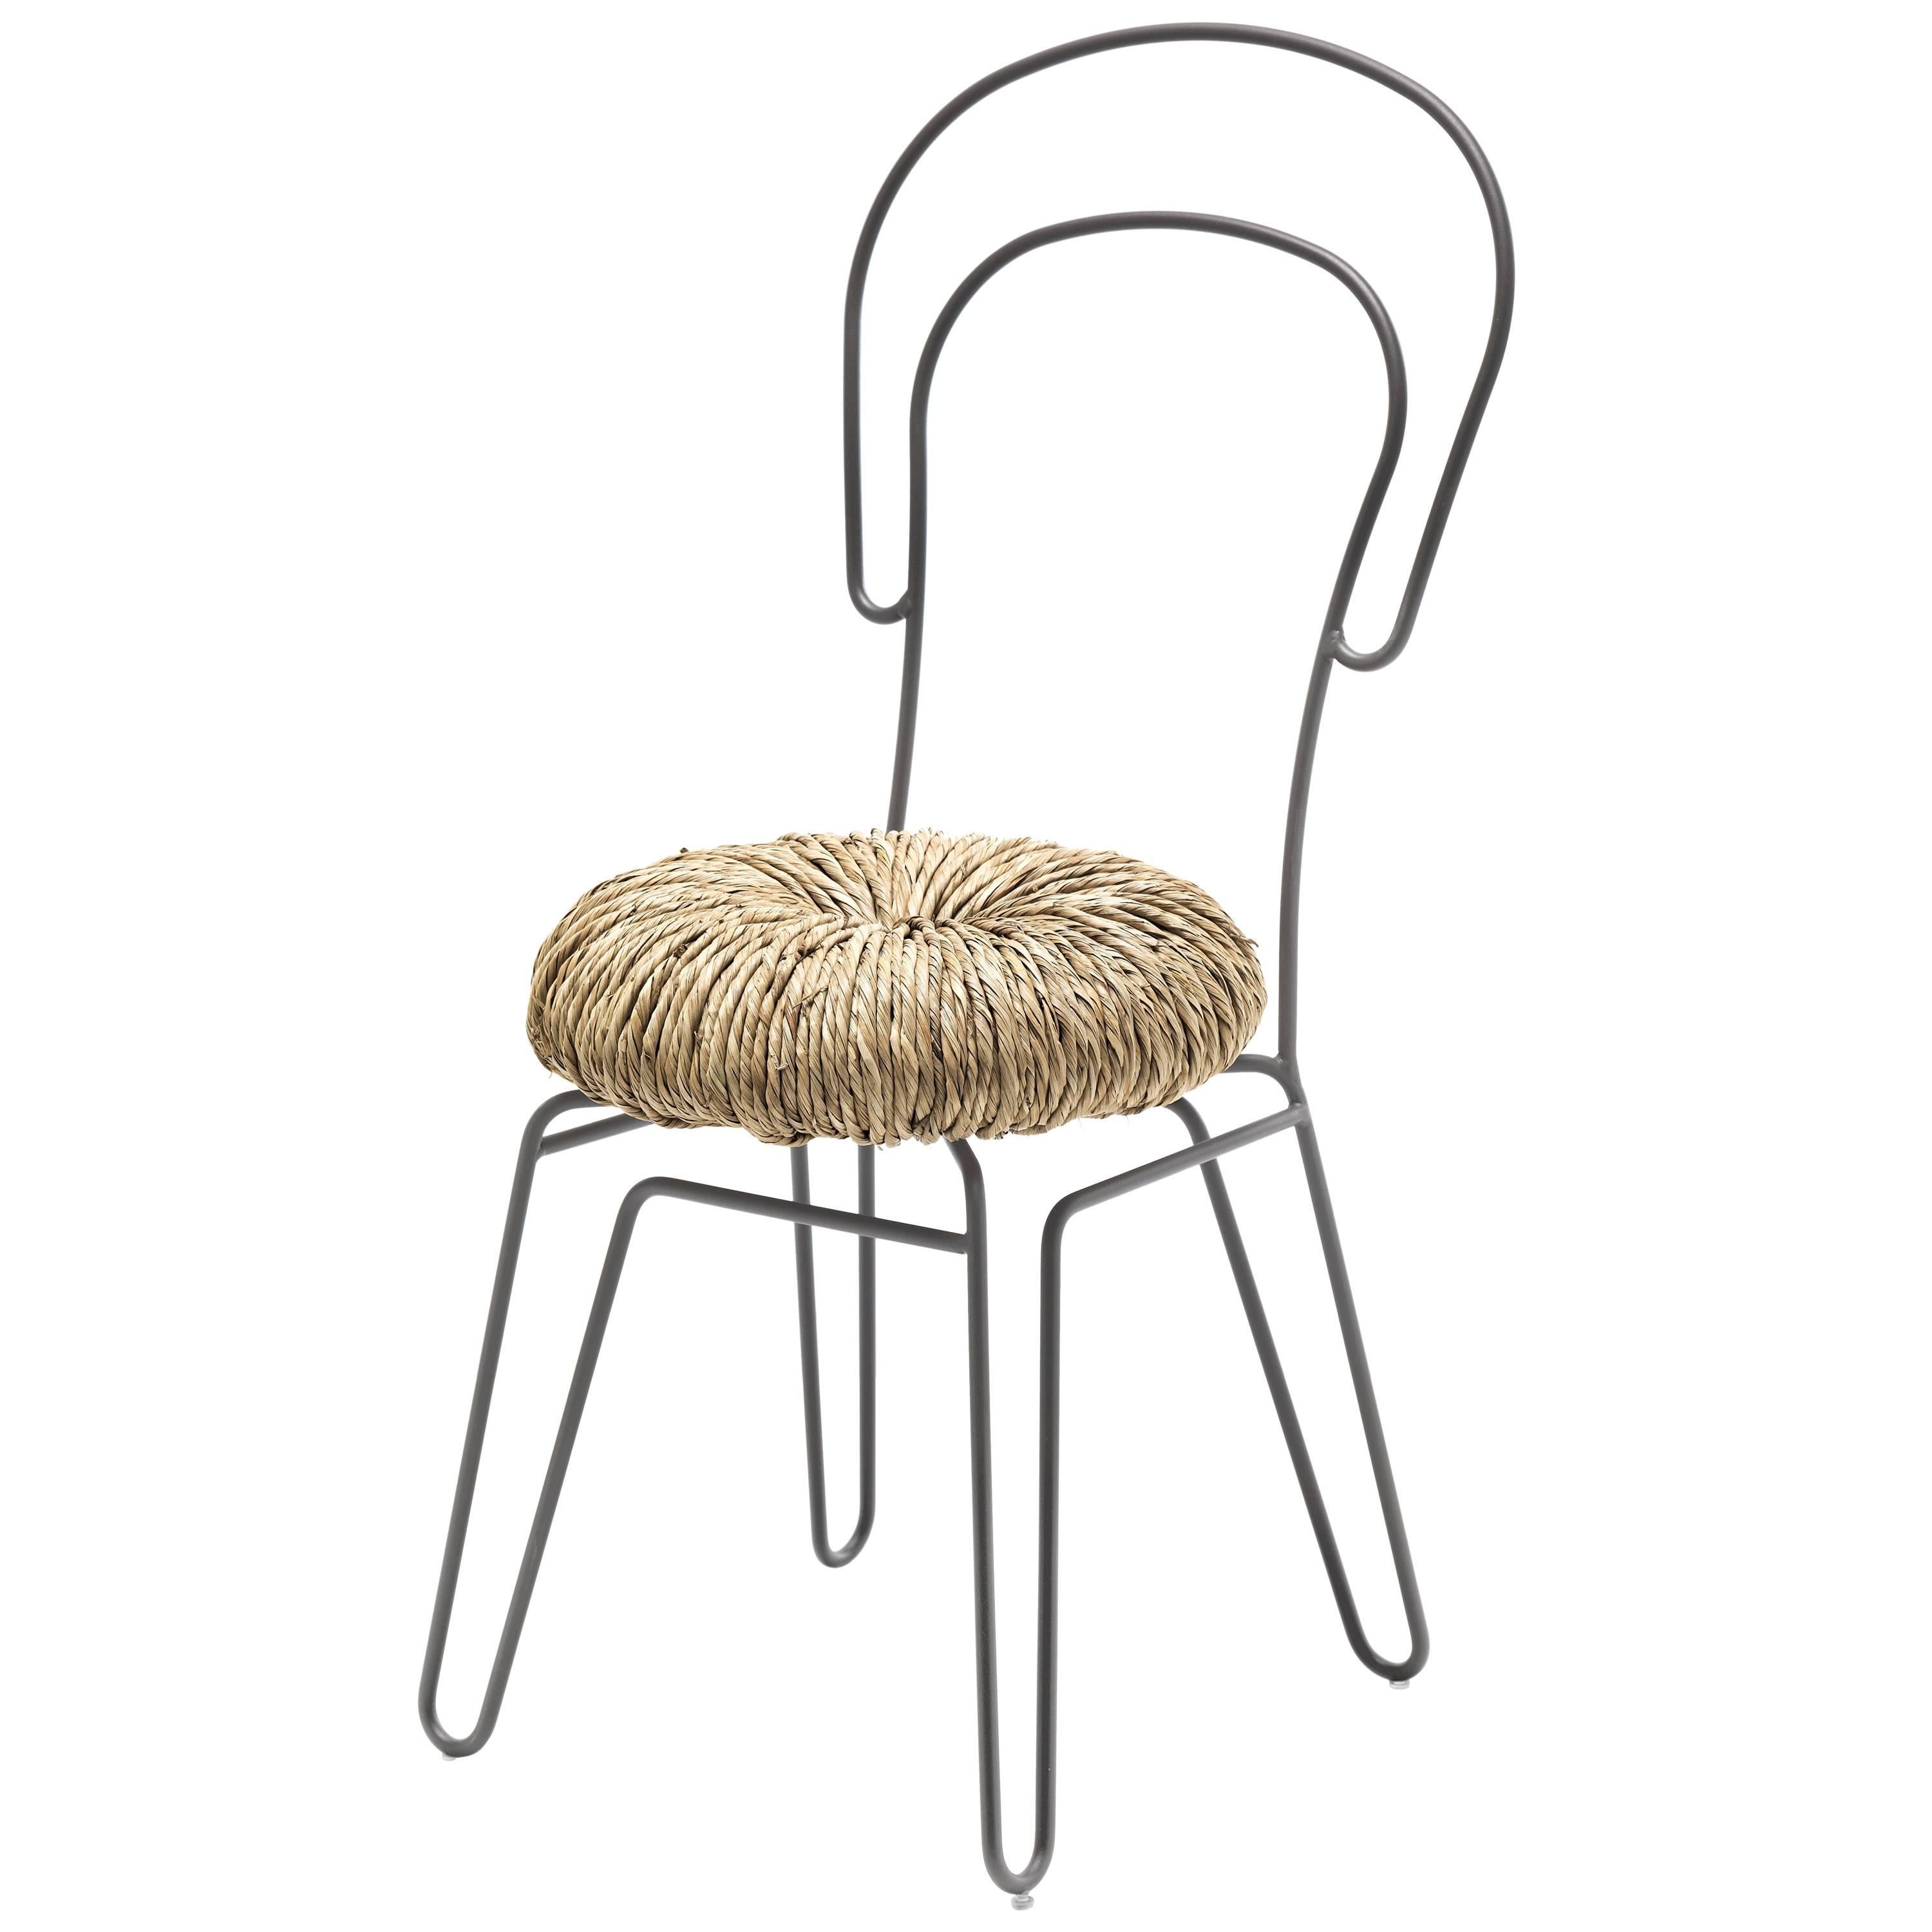 Donut Chair 'Set of Two' in Silver Finish by Alessandra Baldereschi & Mogg For Sale